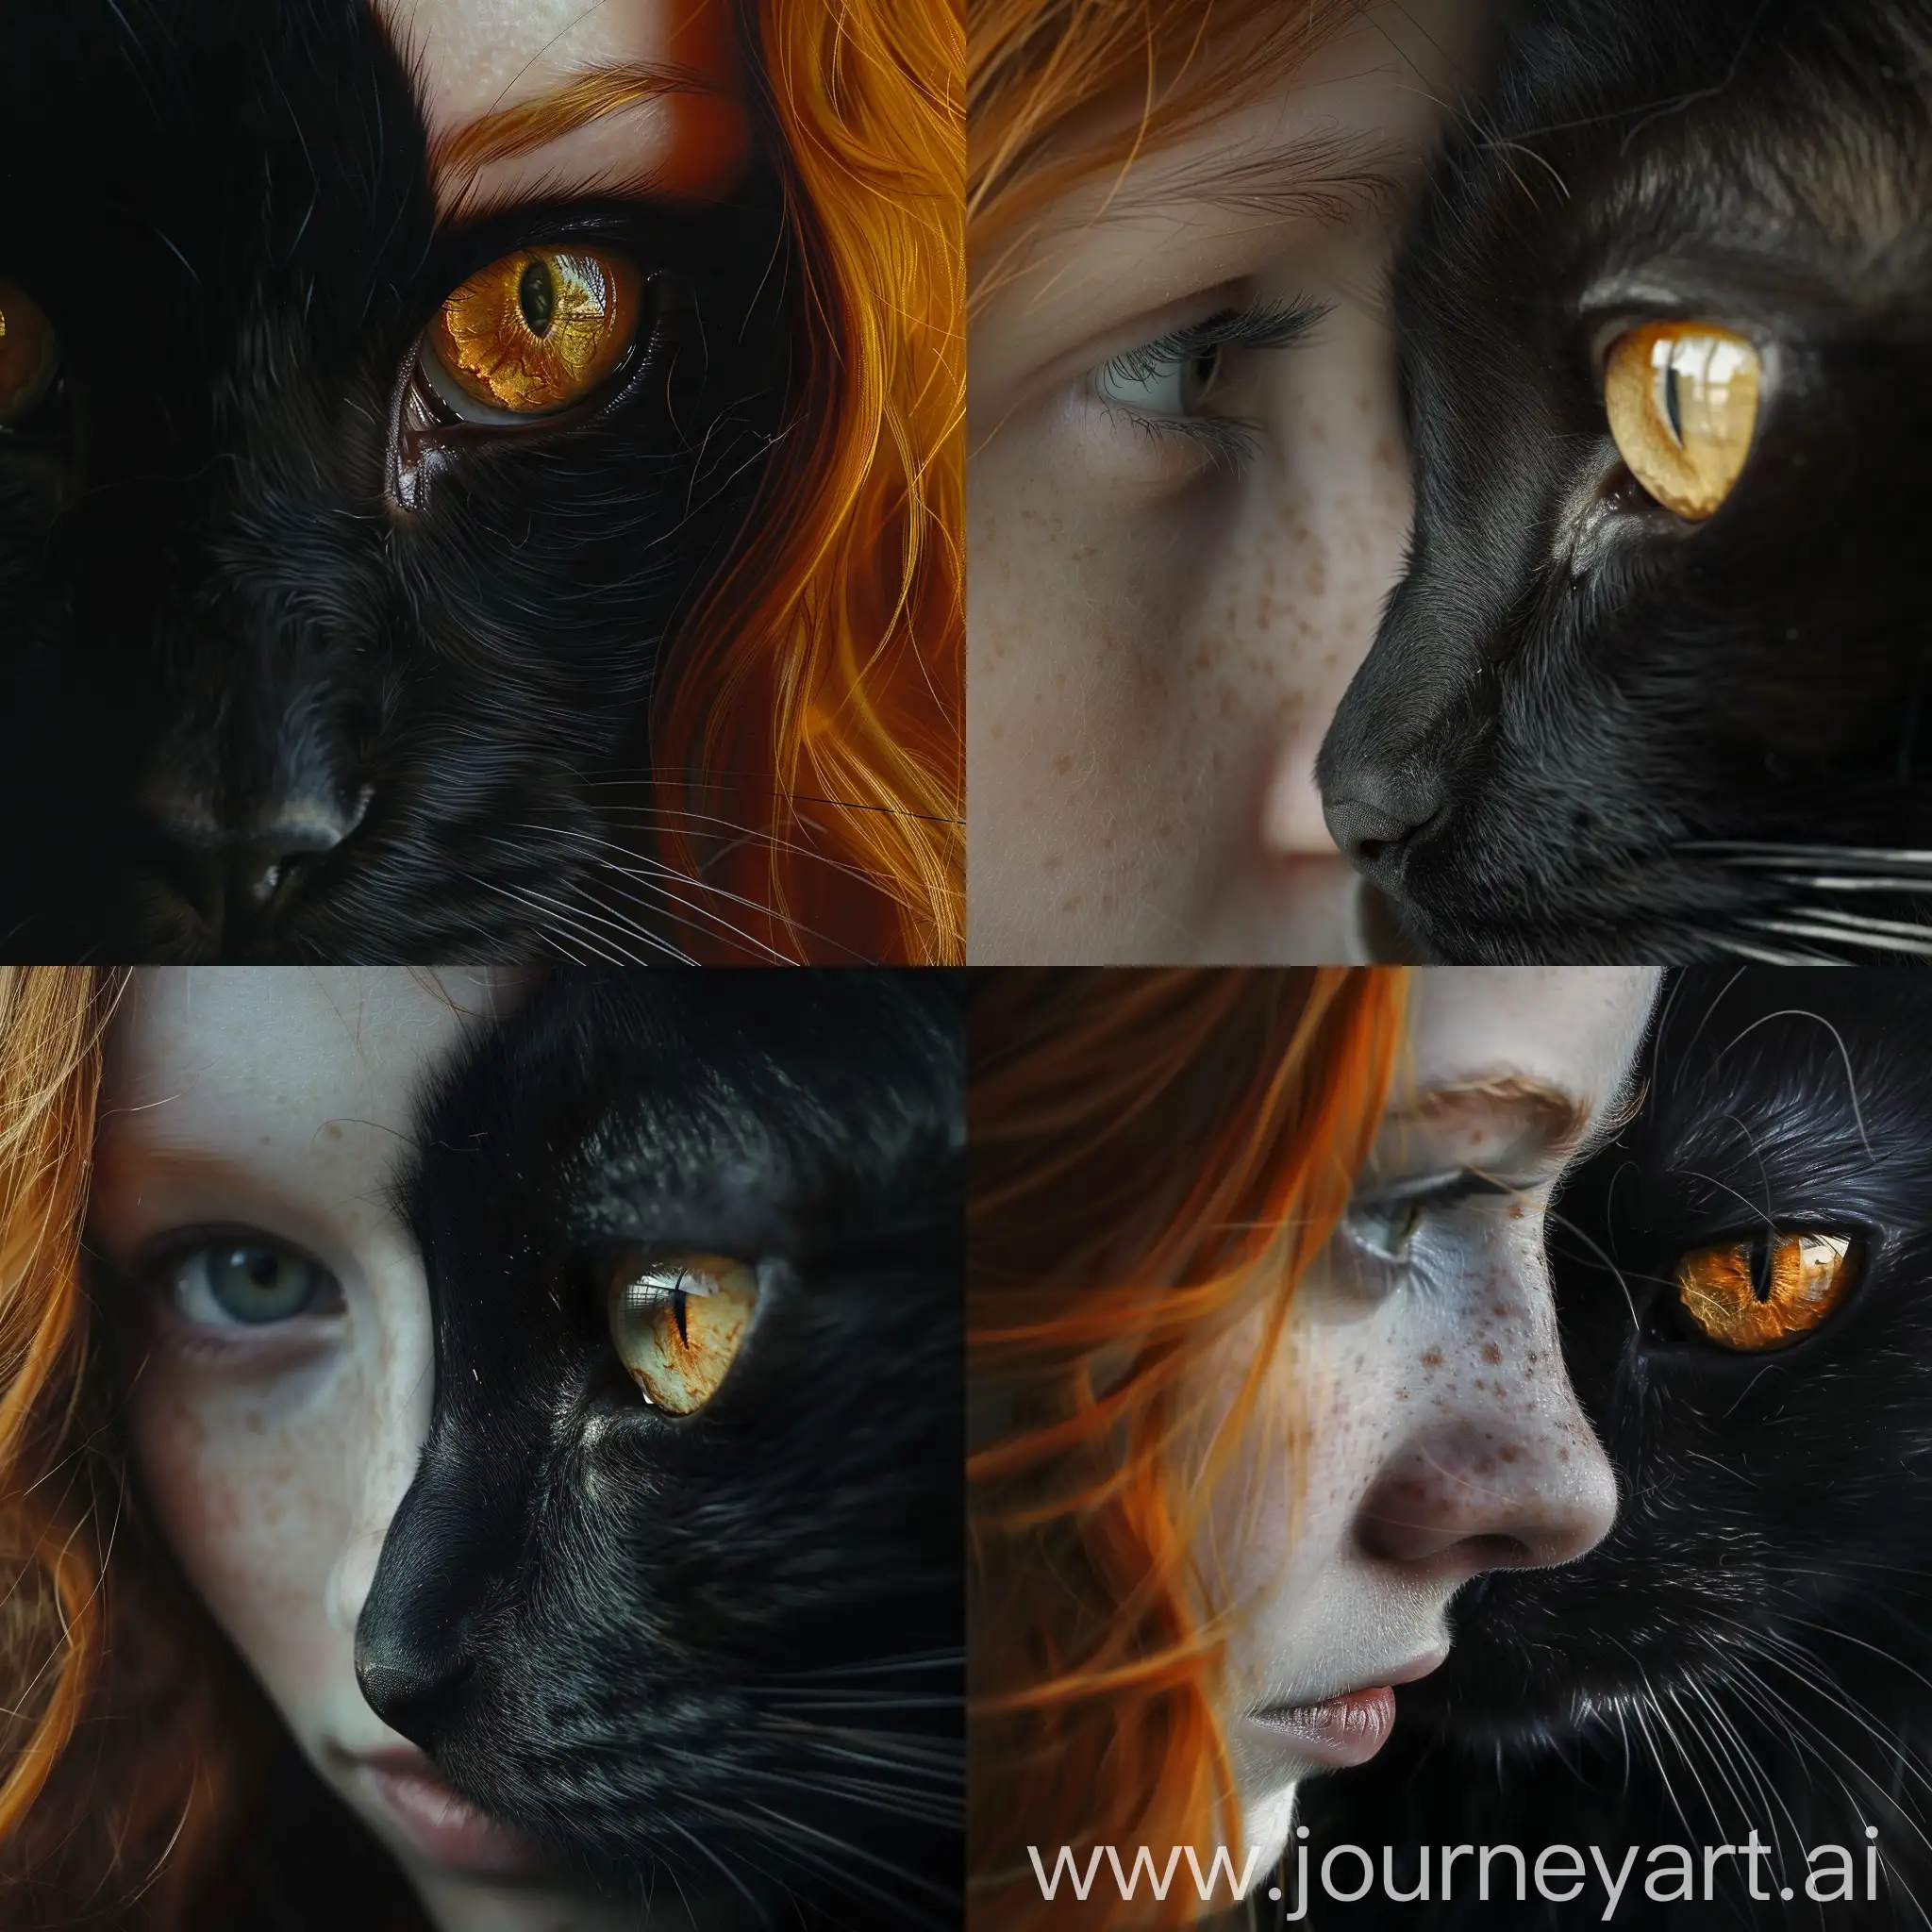 Surreal-Portrait-of-Girl-with-Ginger-Hair-and-Transformed-Cat-Eye